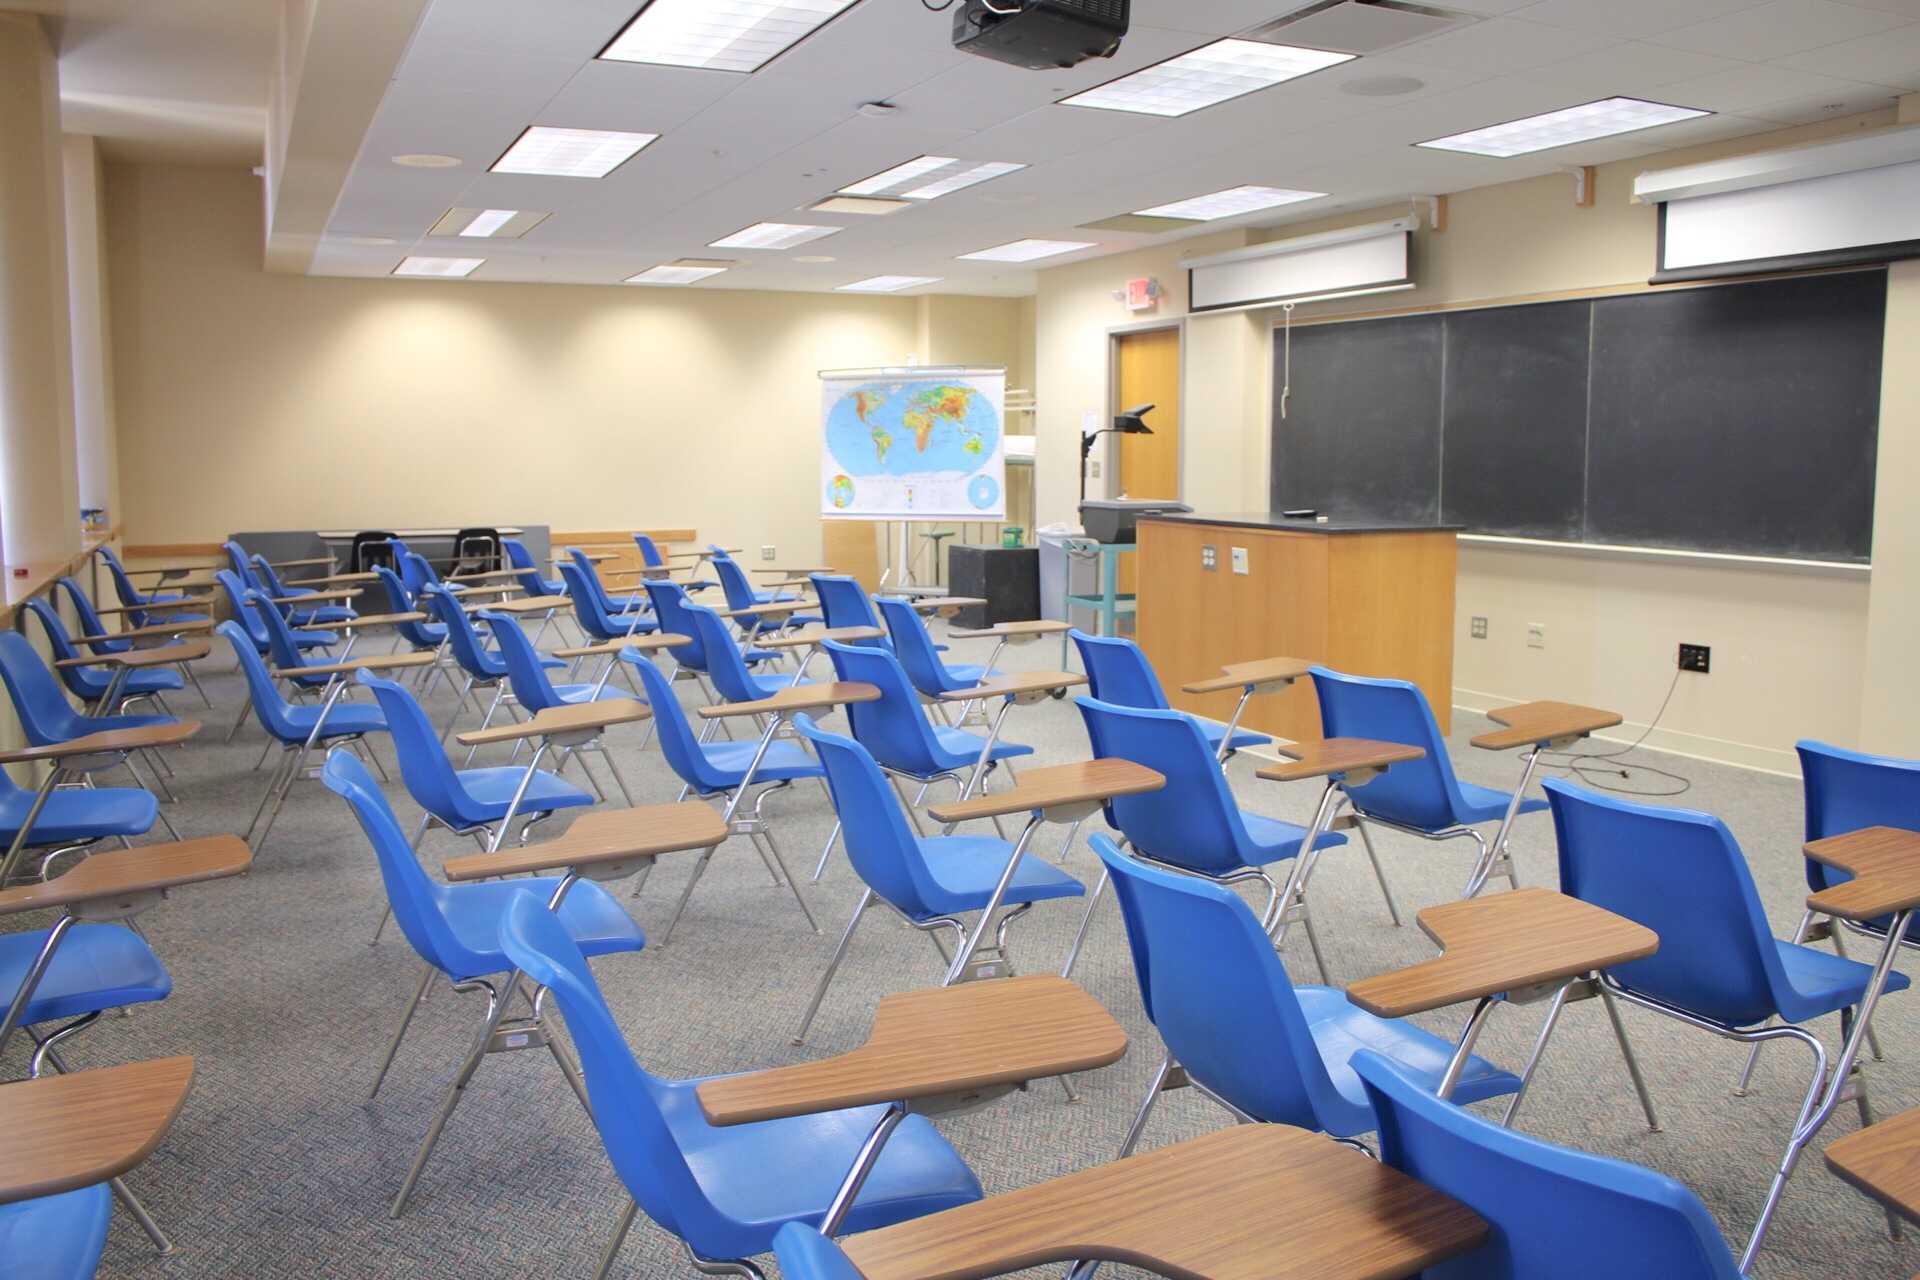 Hoyt Lecture 105 sideview of chairs with desk arms. a long chalkboard and 2 ceiling mounted projection screens.